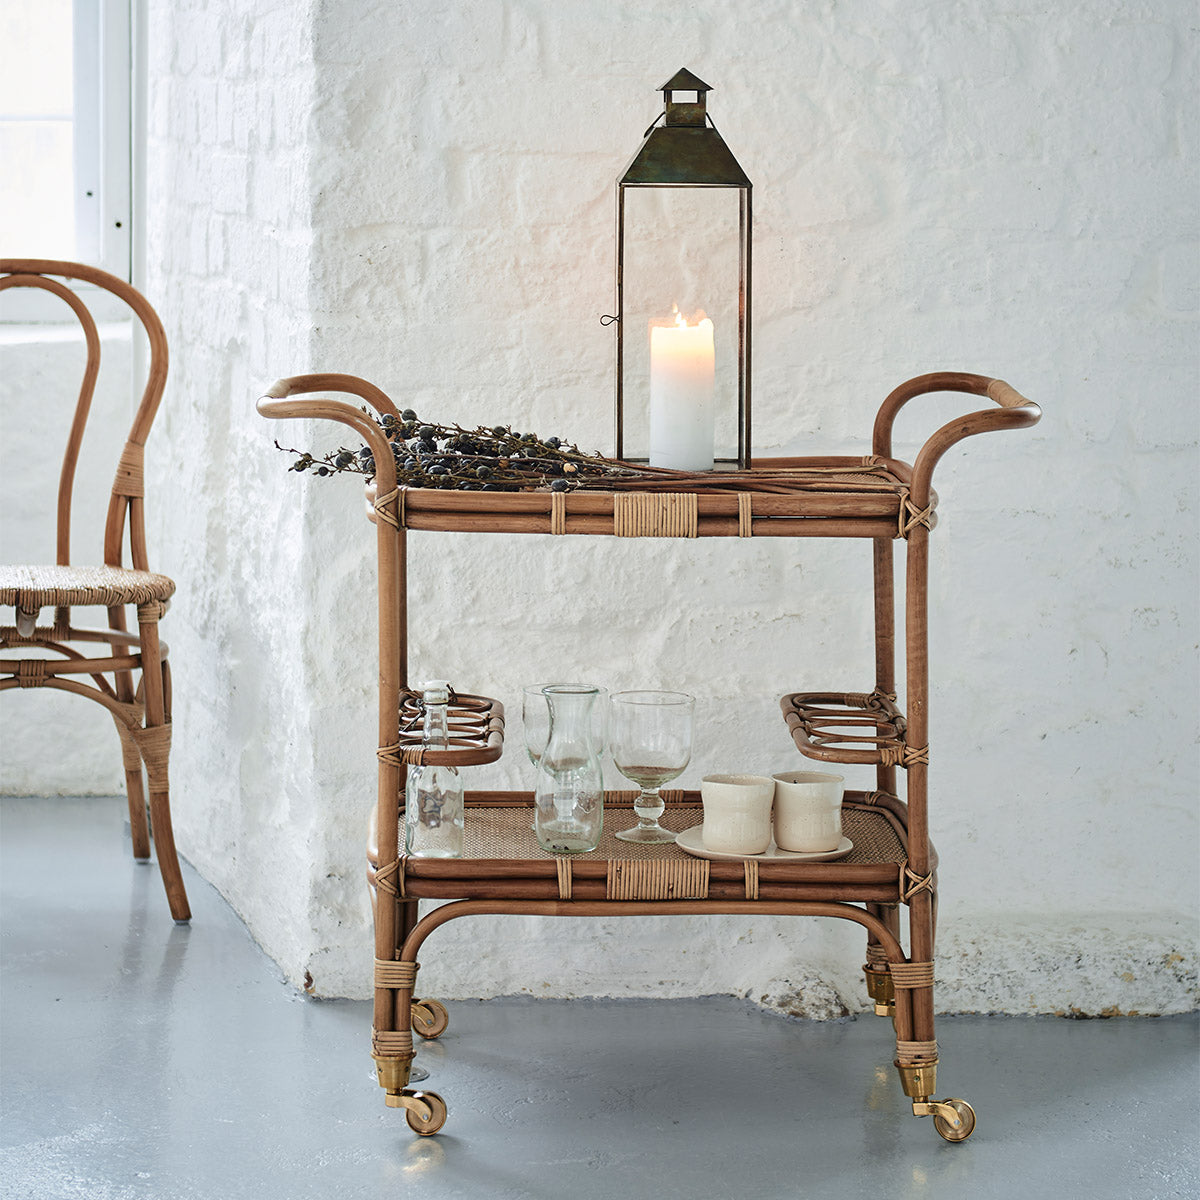 Rolling bar cart in rattan and wicker